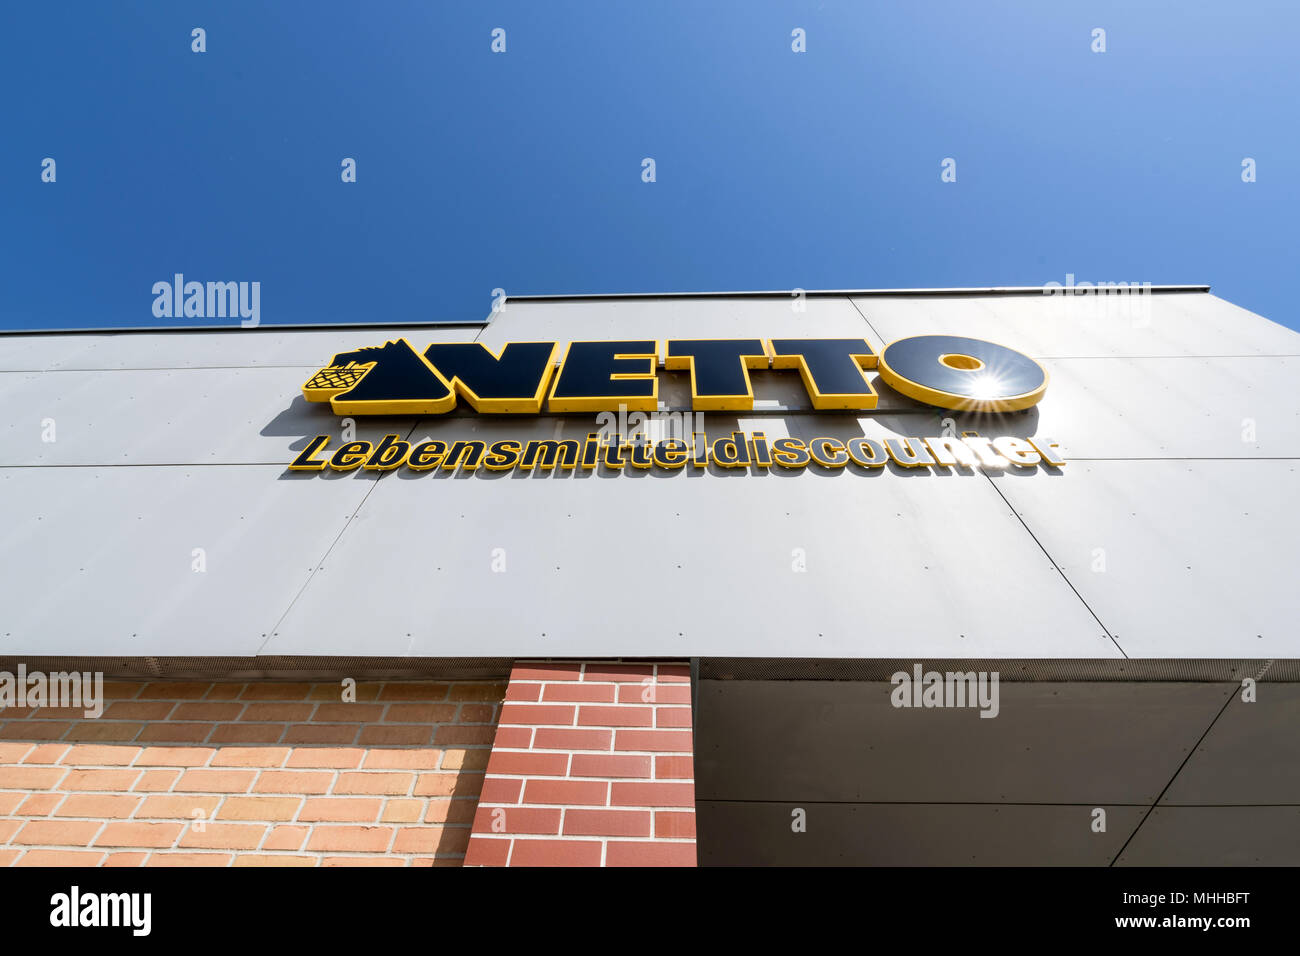 Netto Lebensmitteldiscounter sign at branch. Netto is a Danish discount supermarket operating in Denmark, Germany, Poland and Sweden. Stock Photo